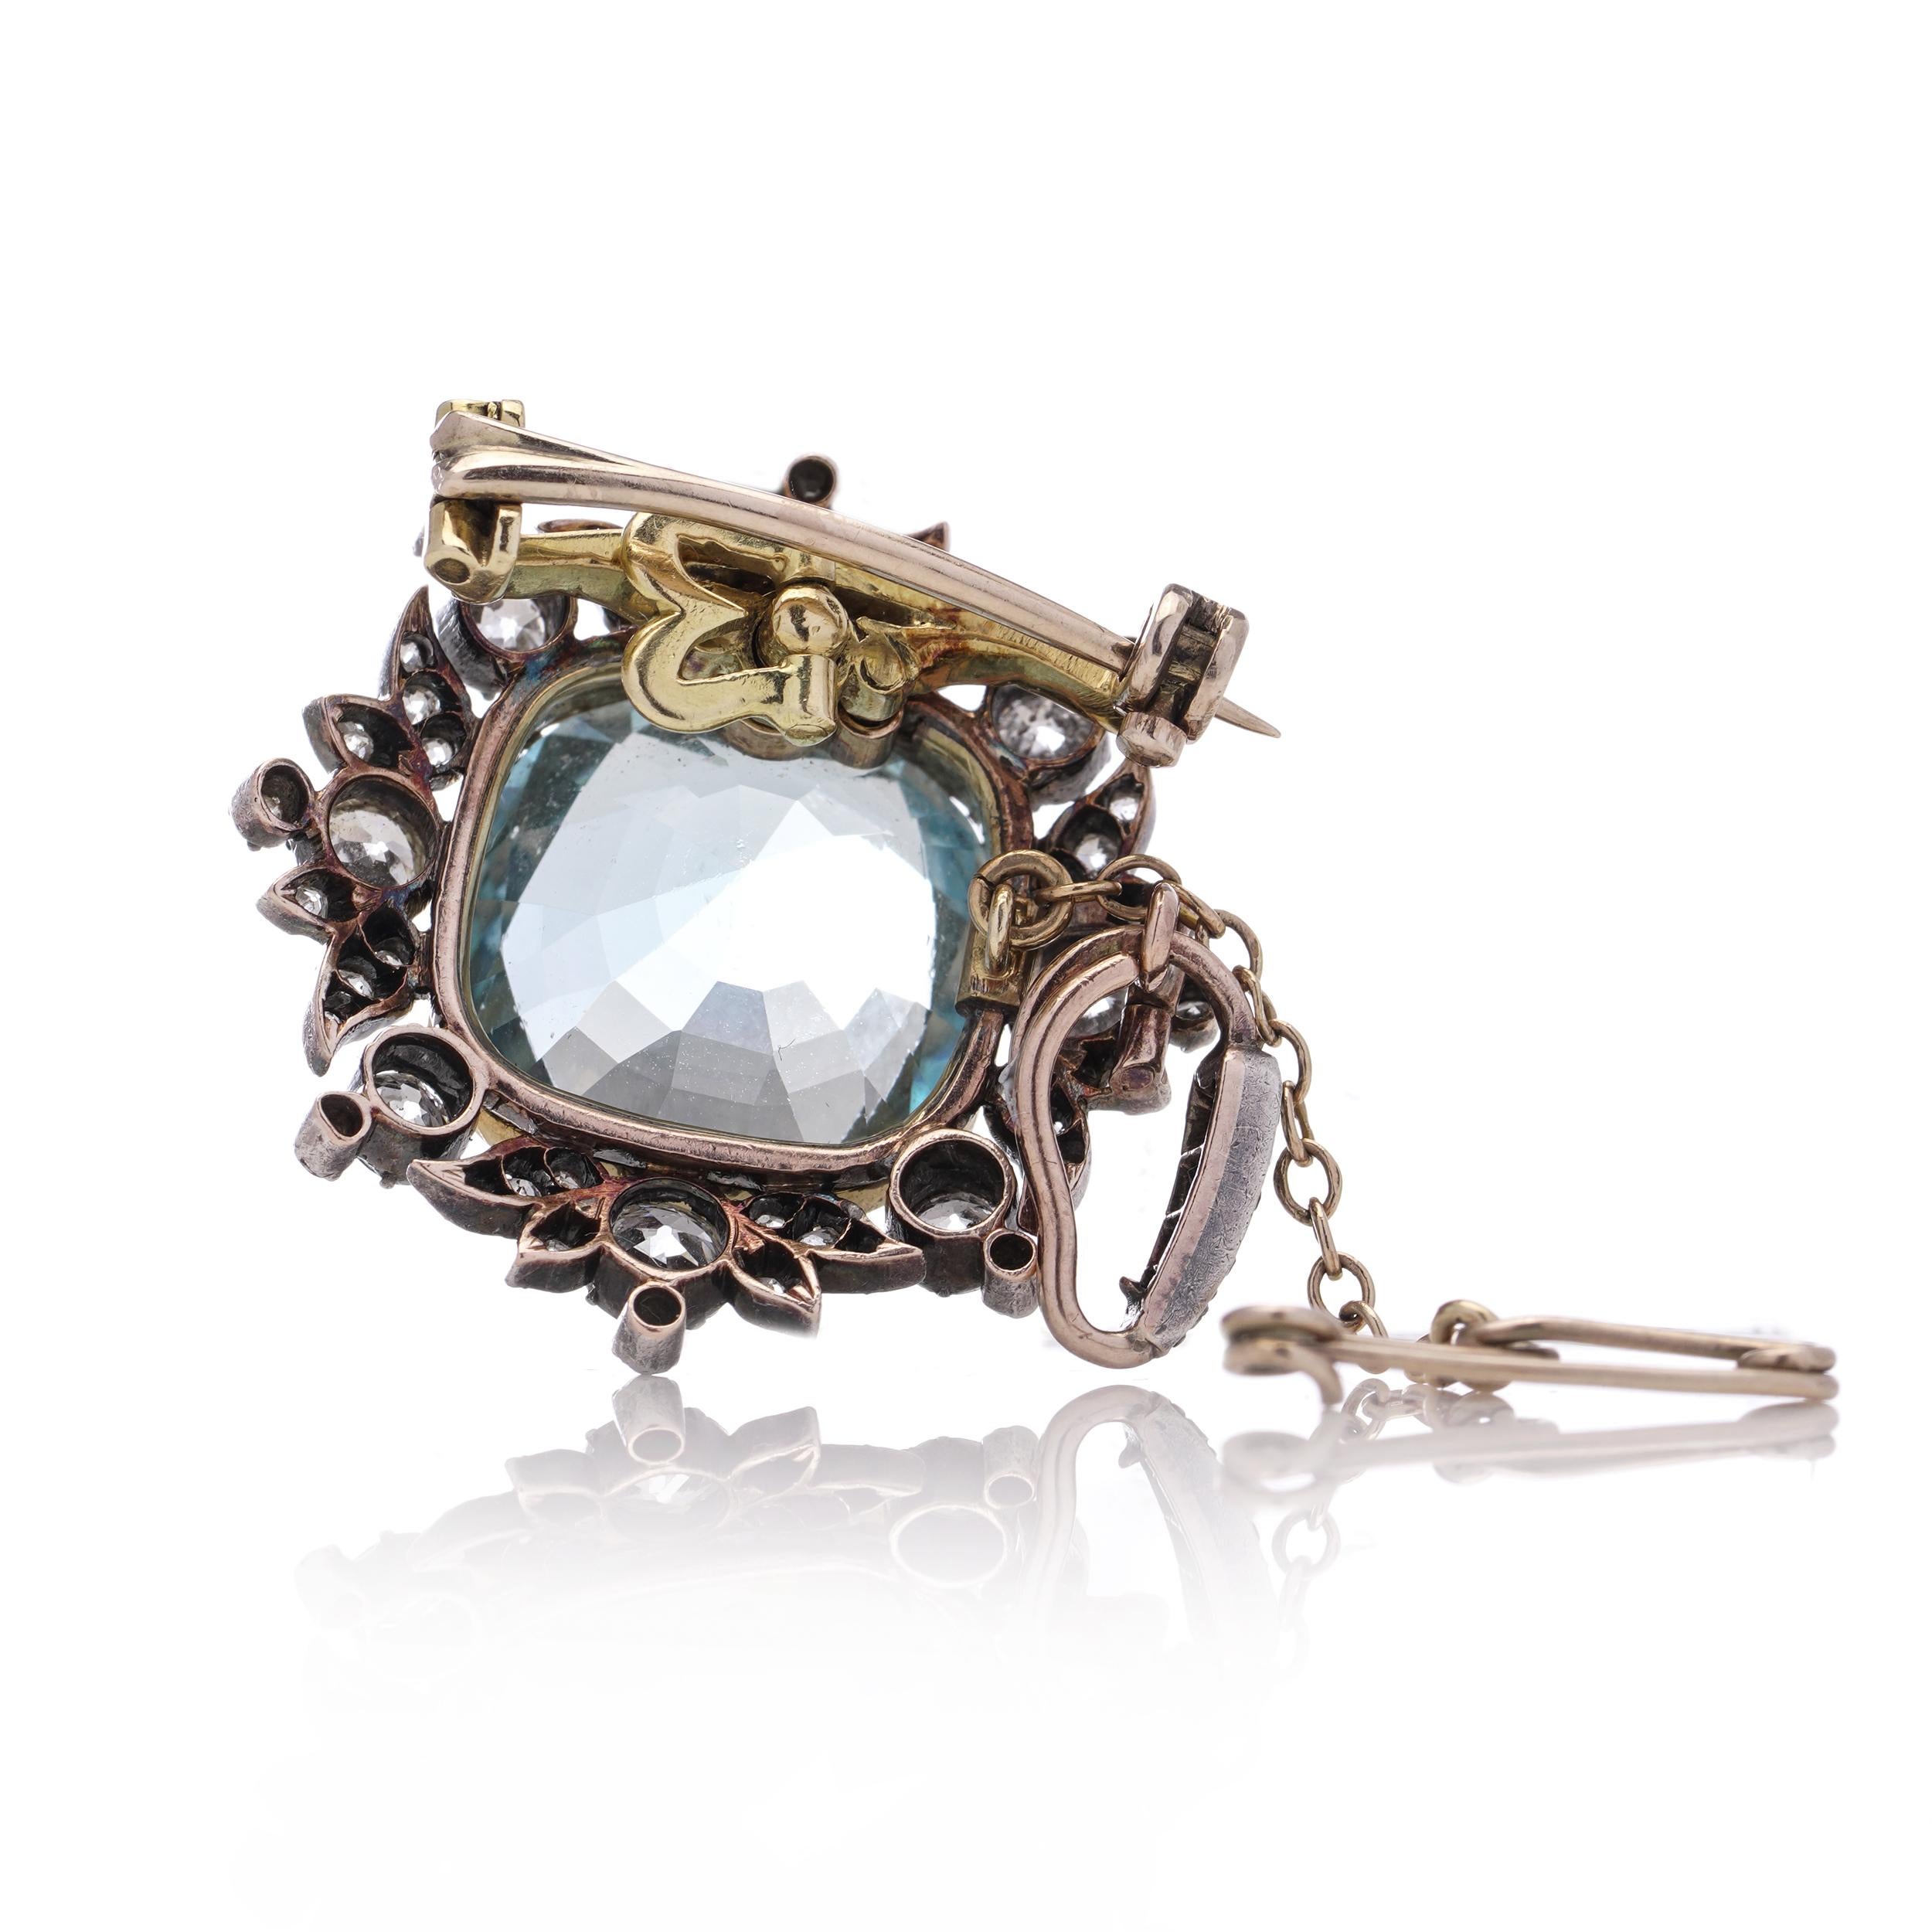 19th Century 9kt gold and silver 7.17 cts. of cushion-cut Aquamarine brooch For Sale 1